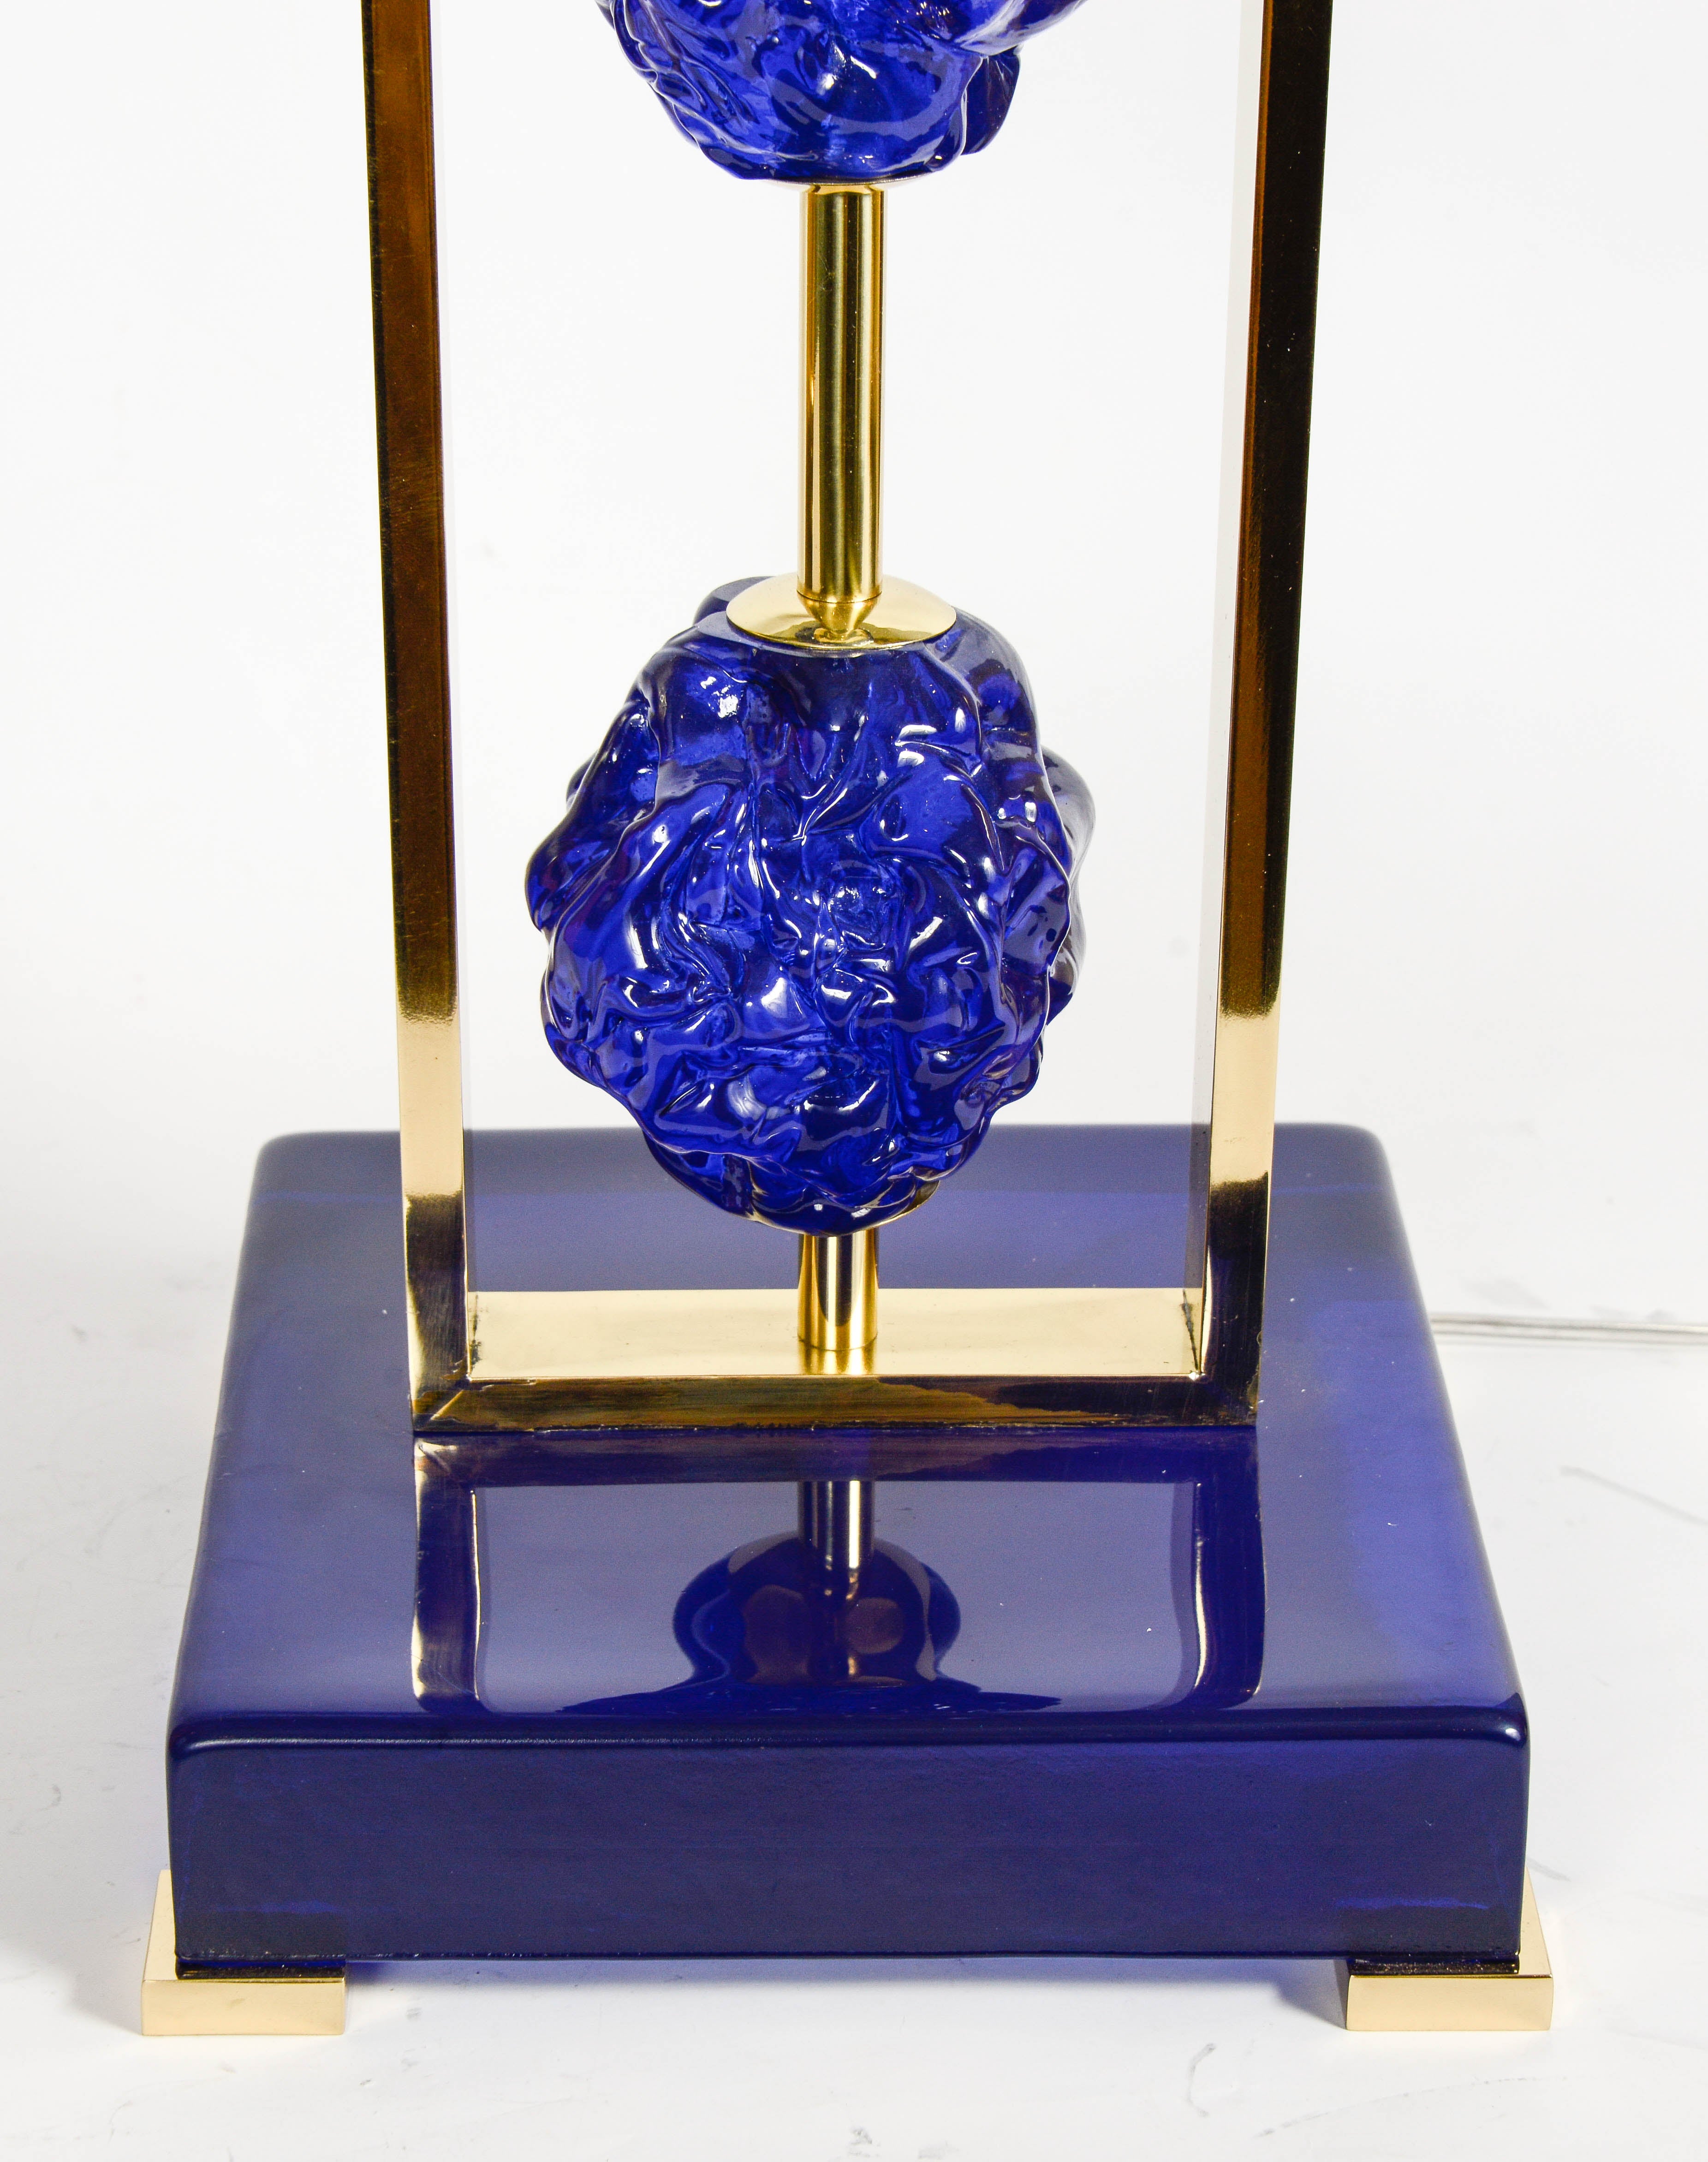 Pair of Murano glass table lamps designed by Régis Royant gallery.
Limited edition of Six pieces.